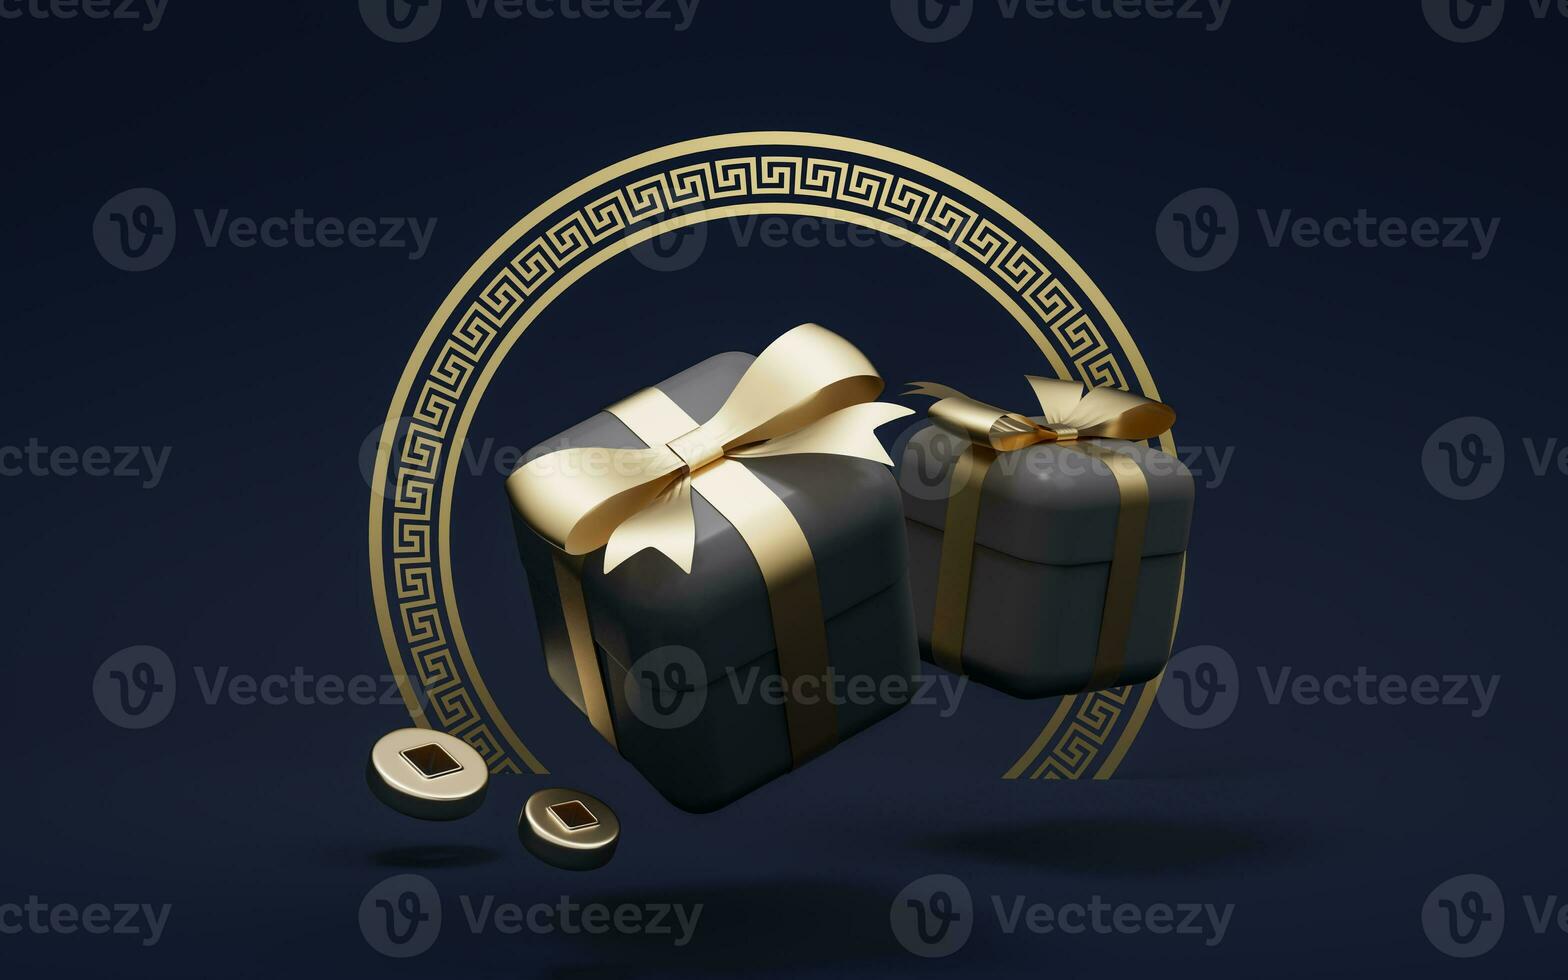 Gifts and Chinese style background, 3d rendering. photo